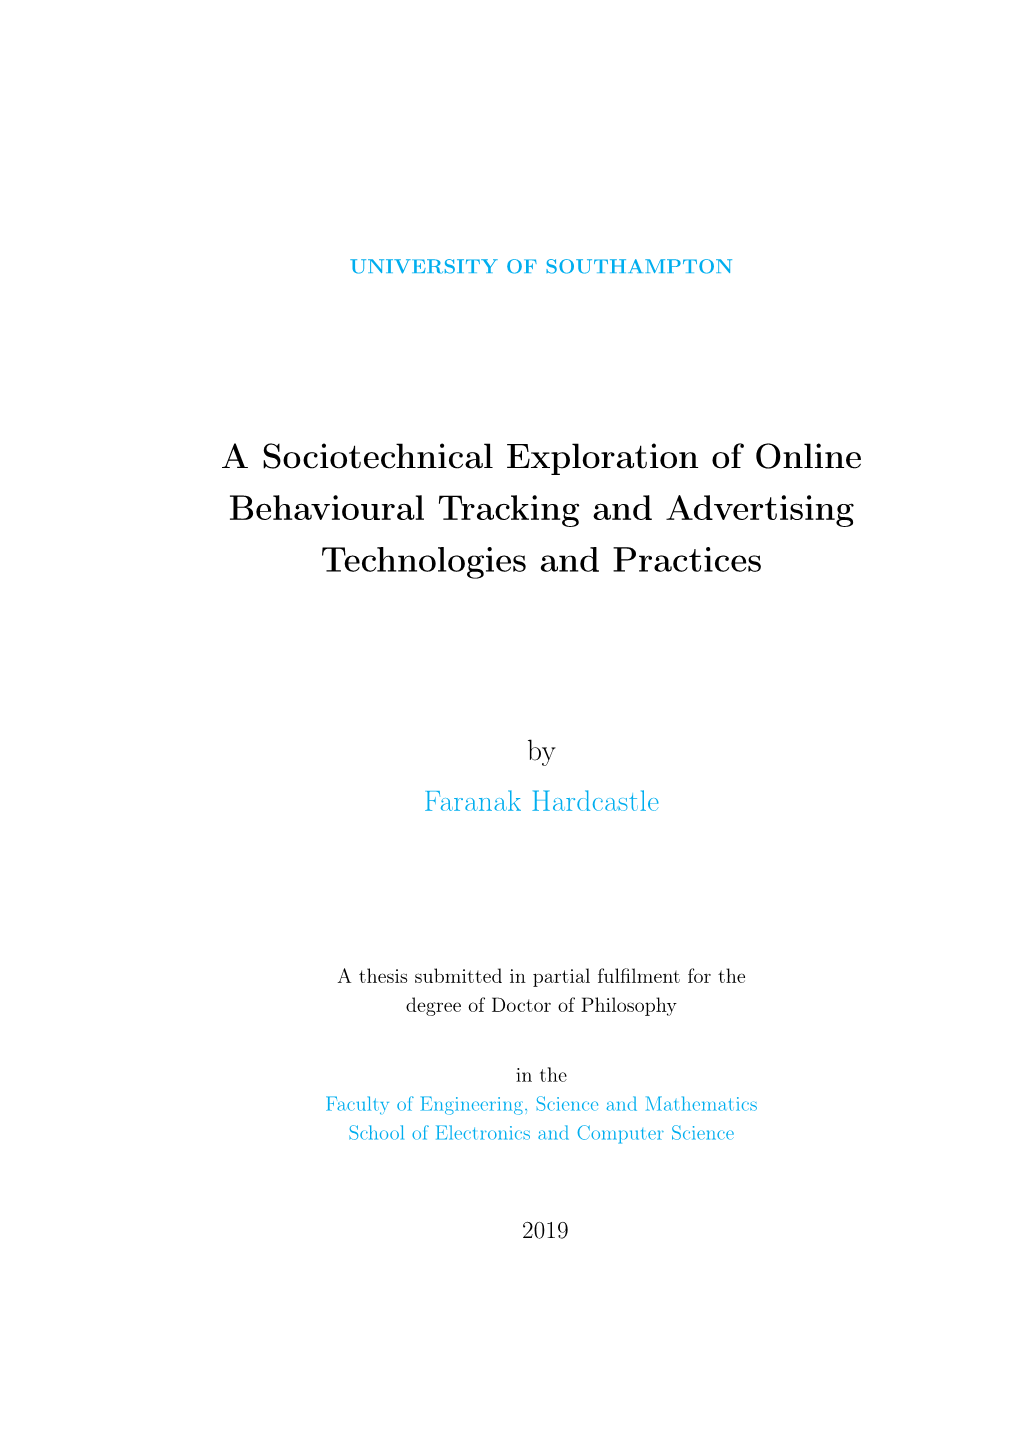 A Sociotechnical Exploration of Online Behavioural Tracking and Advertising Technologies and Practices